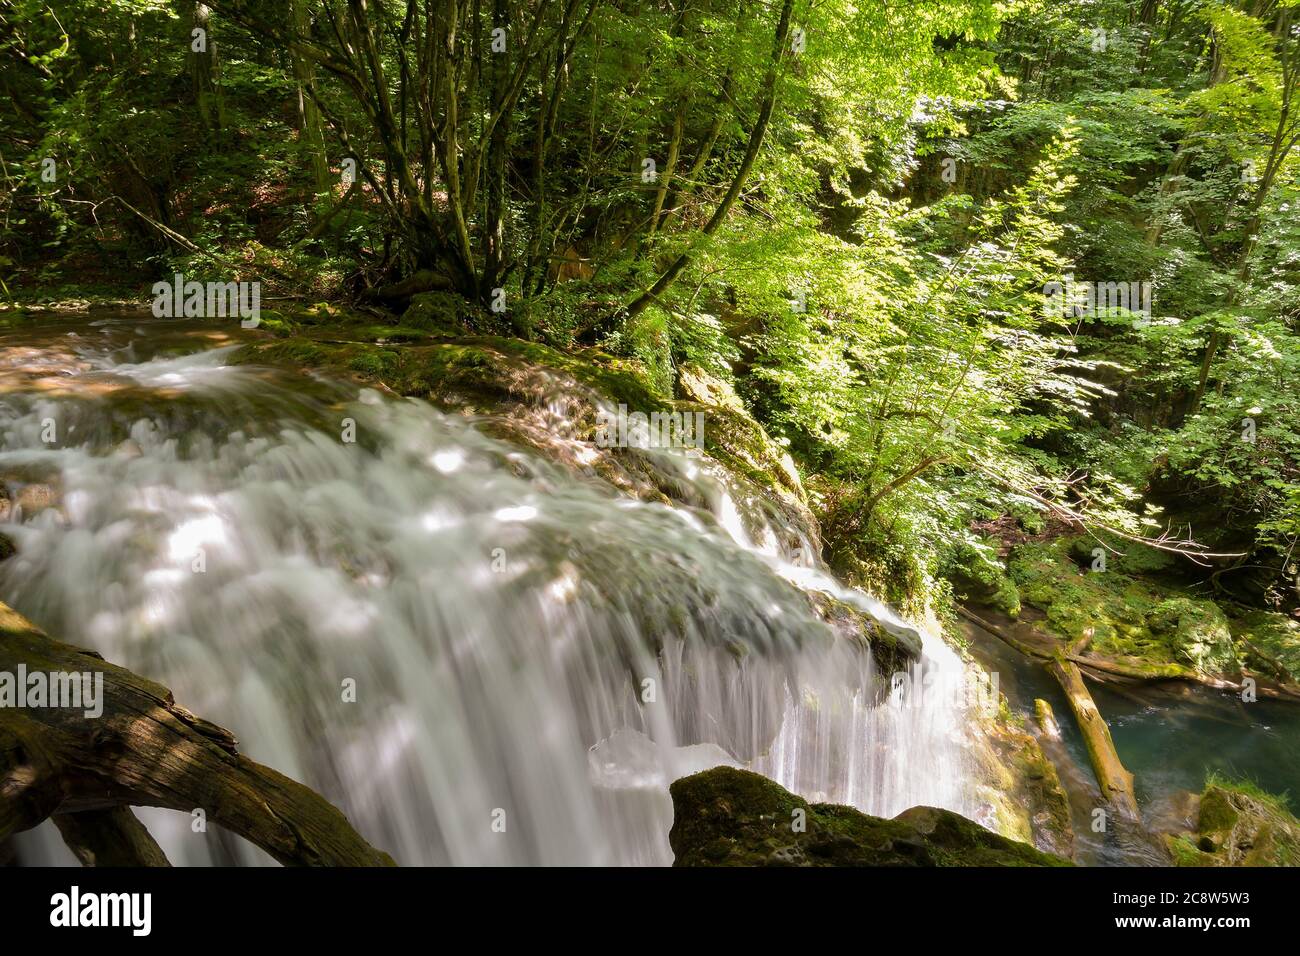 Cheile Nerei - Beusnita. Caras. Romania. Summer in wild Romanian river and forest. Long exposure. Stock Photo